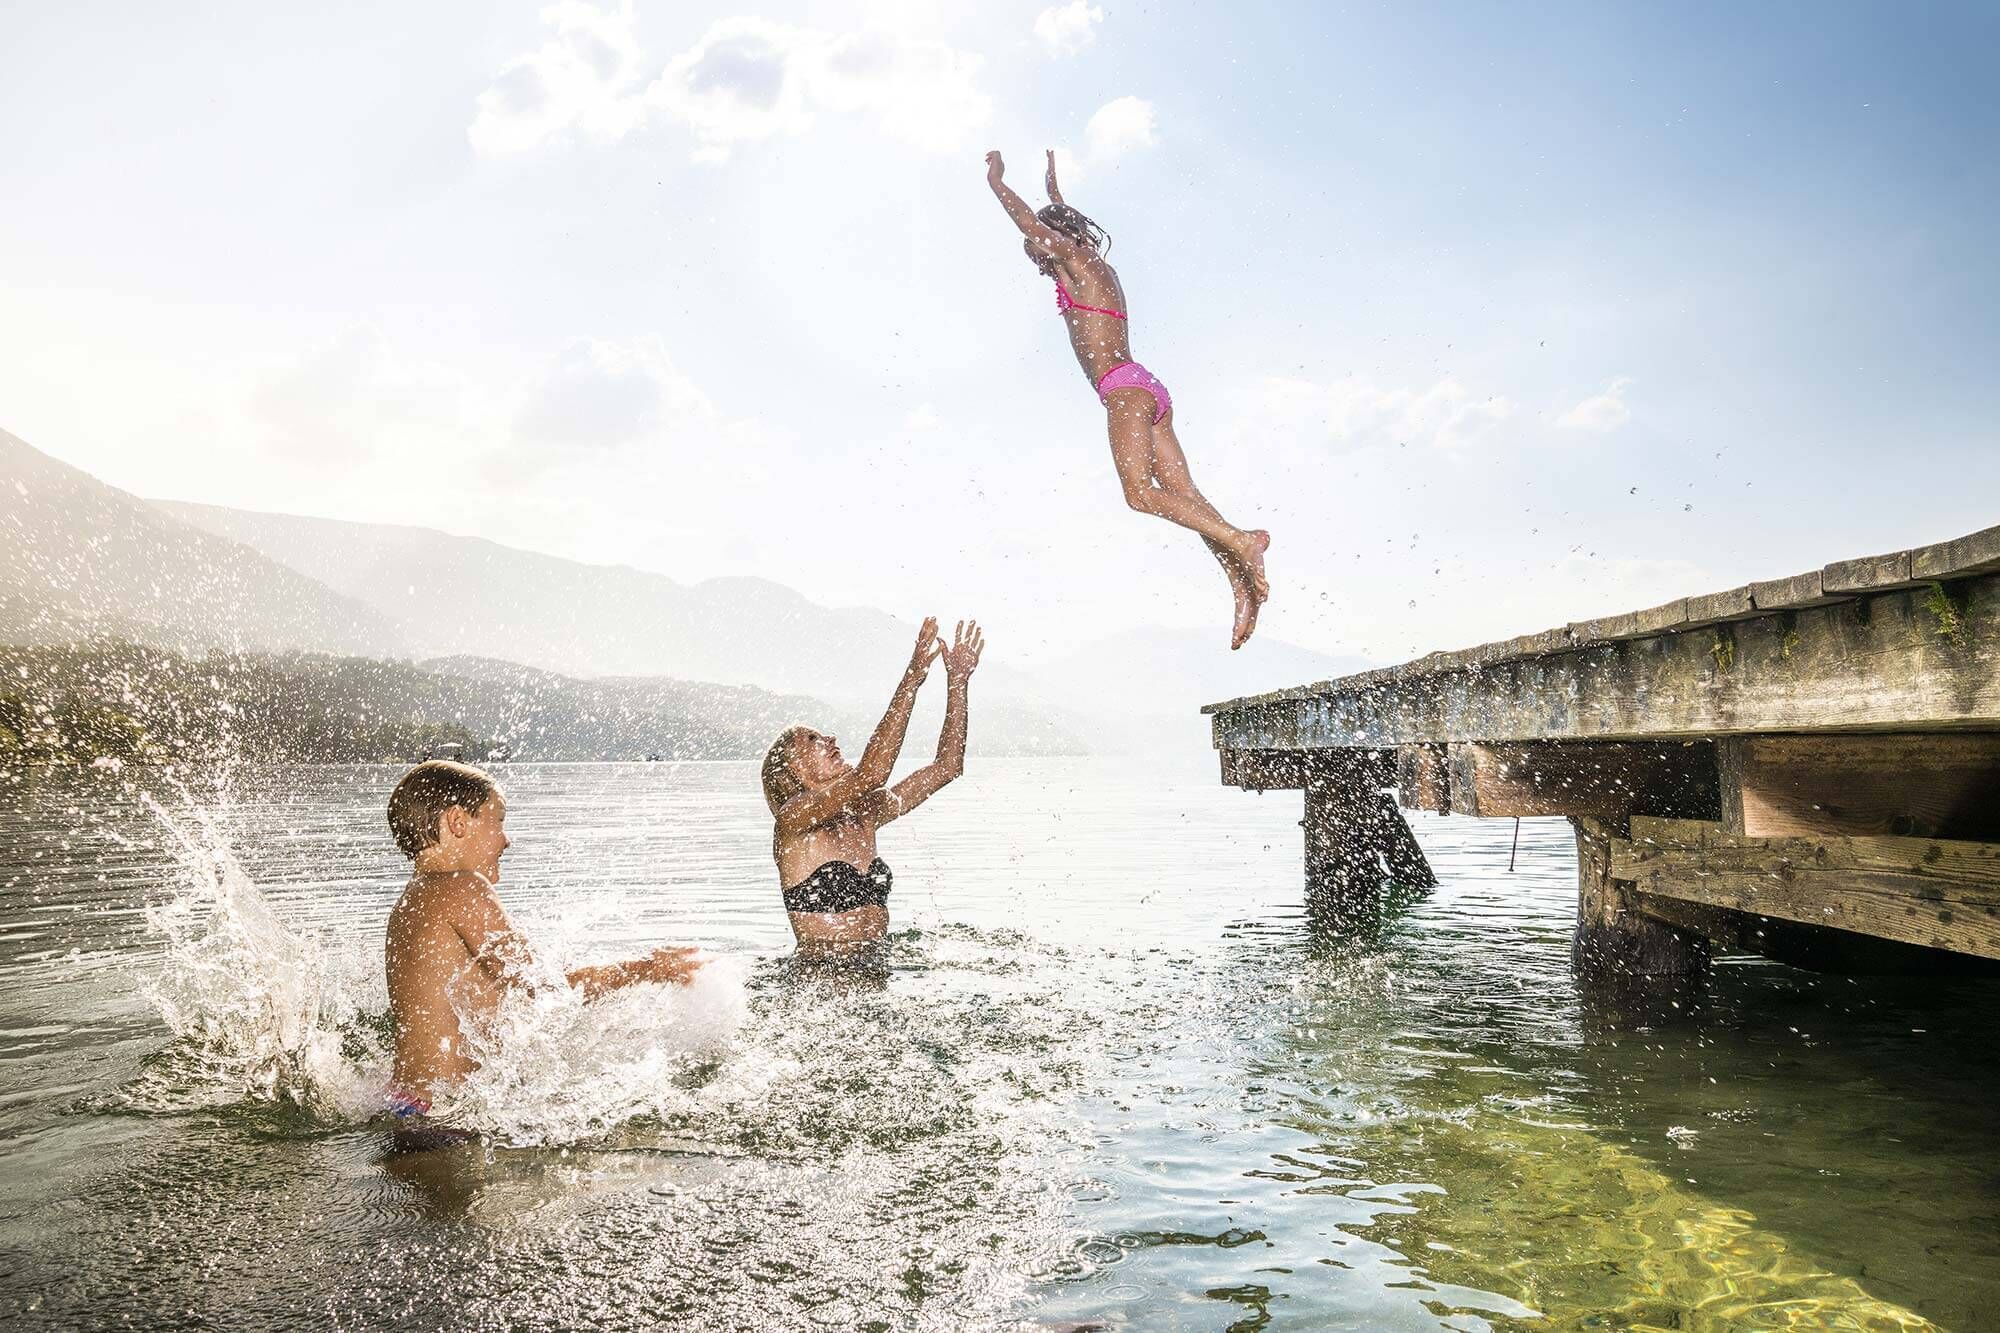 Child jumps from a jetty into the lake where the mother wants to catch her.